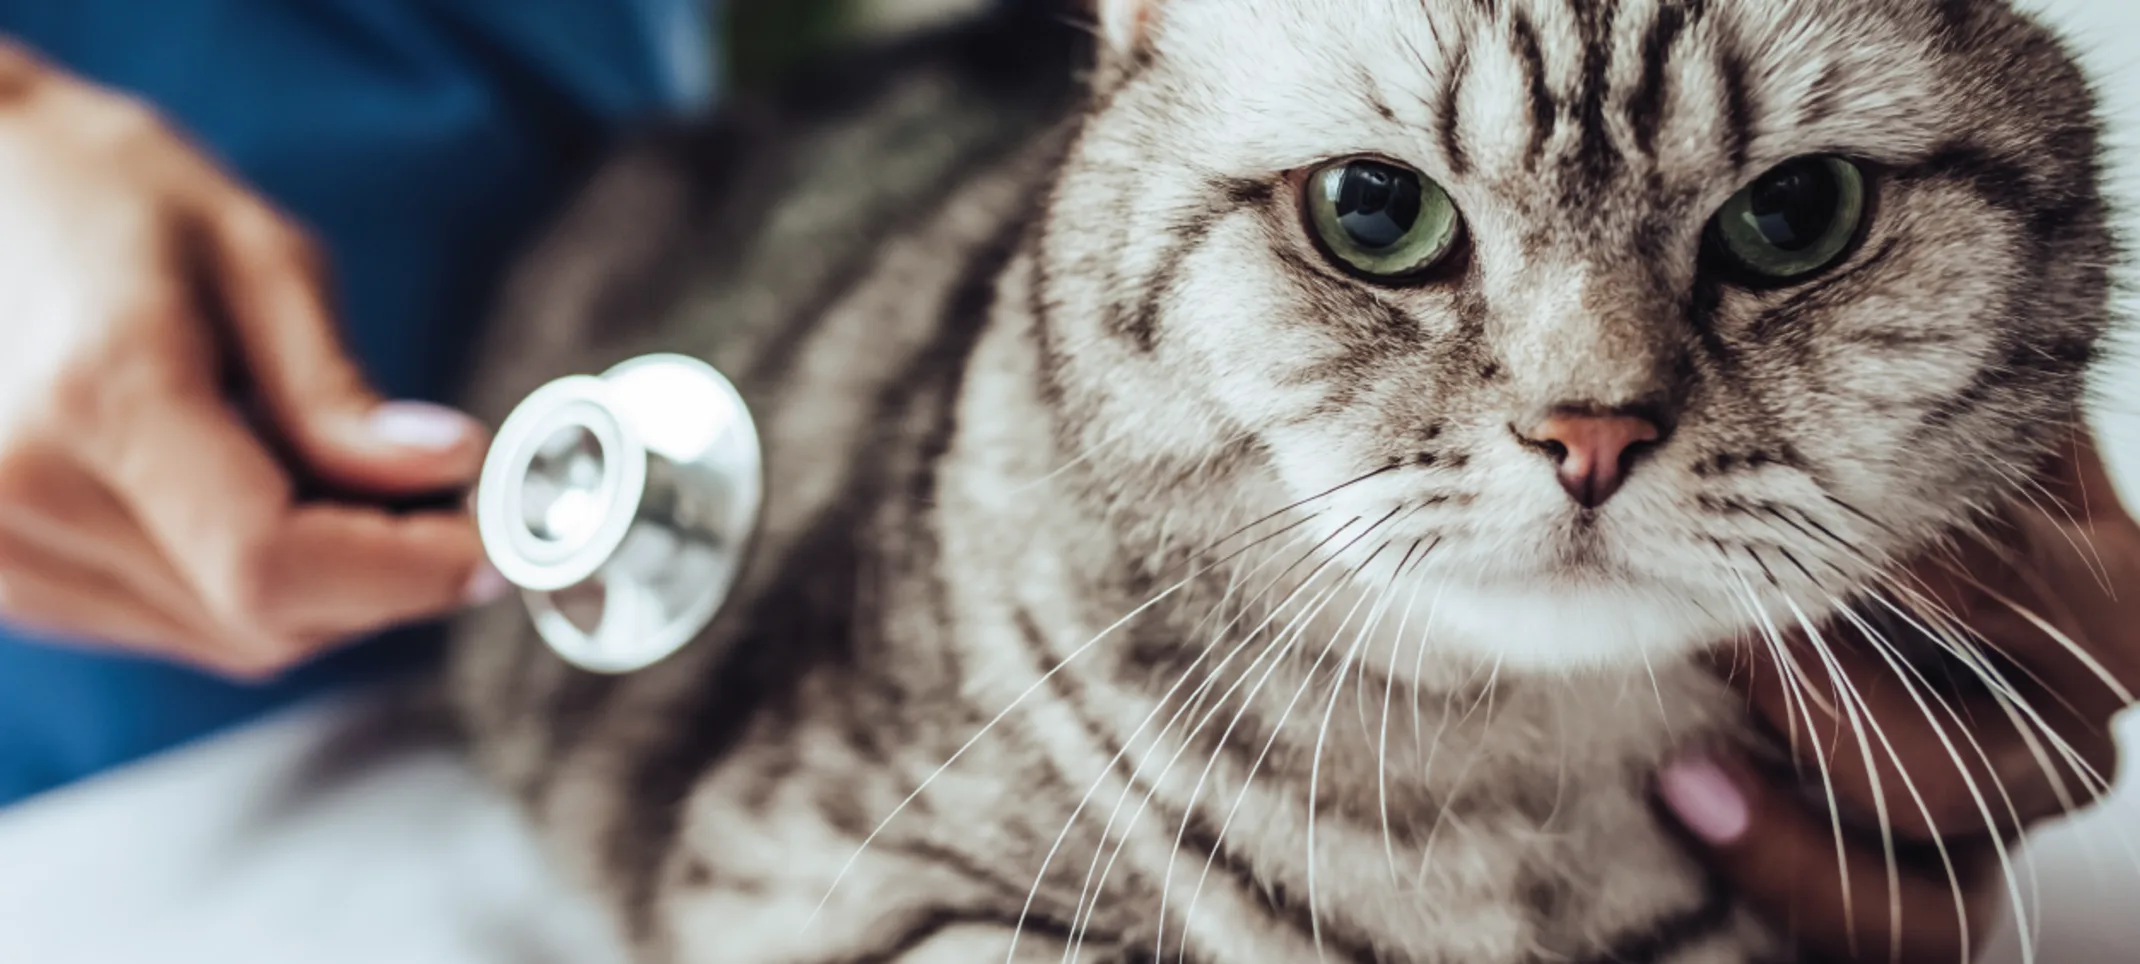 Cat with stethoscope